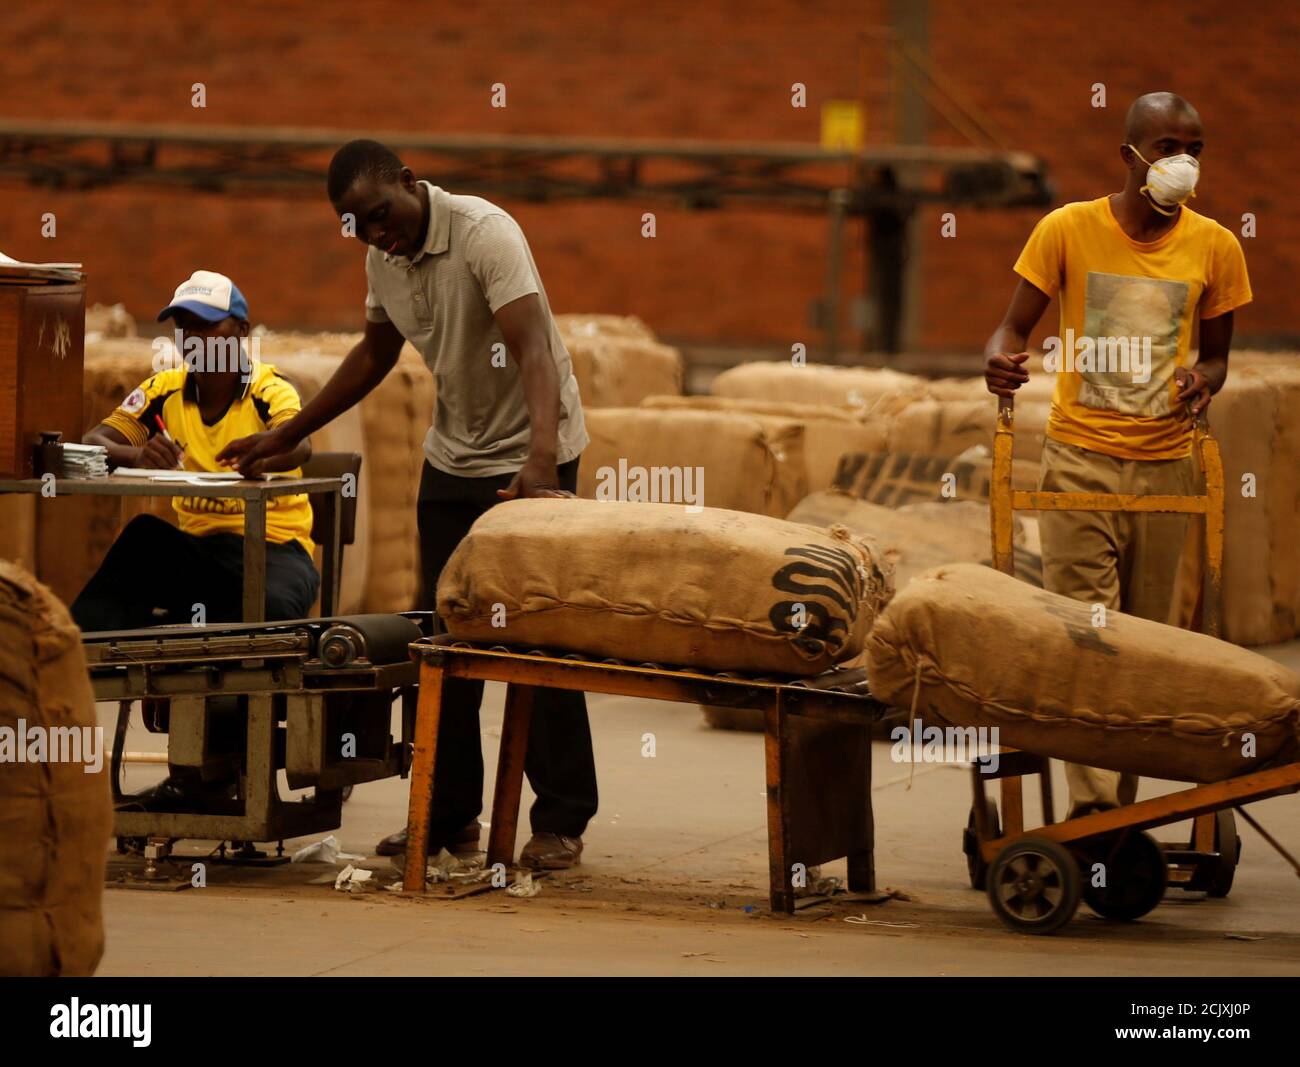 Workers await the start of the marketing season at Tobacco Sales Floor in Harare, Zimbabwe, March 21, 2018. REUTERS/Philimon Bulawayo Stock Photo